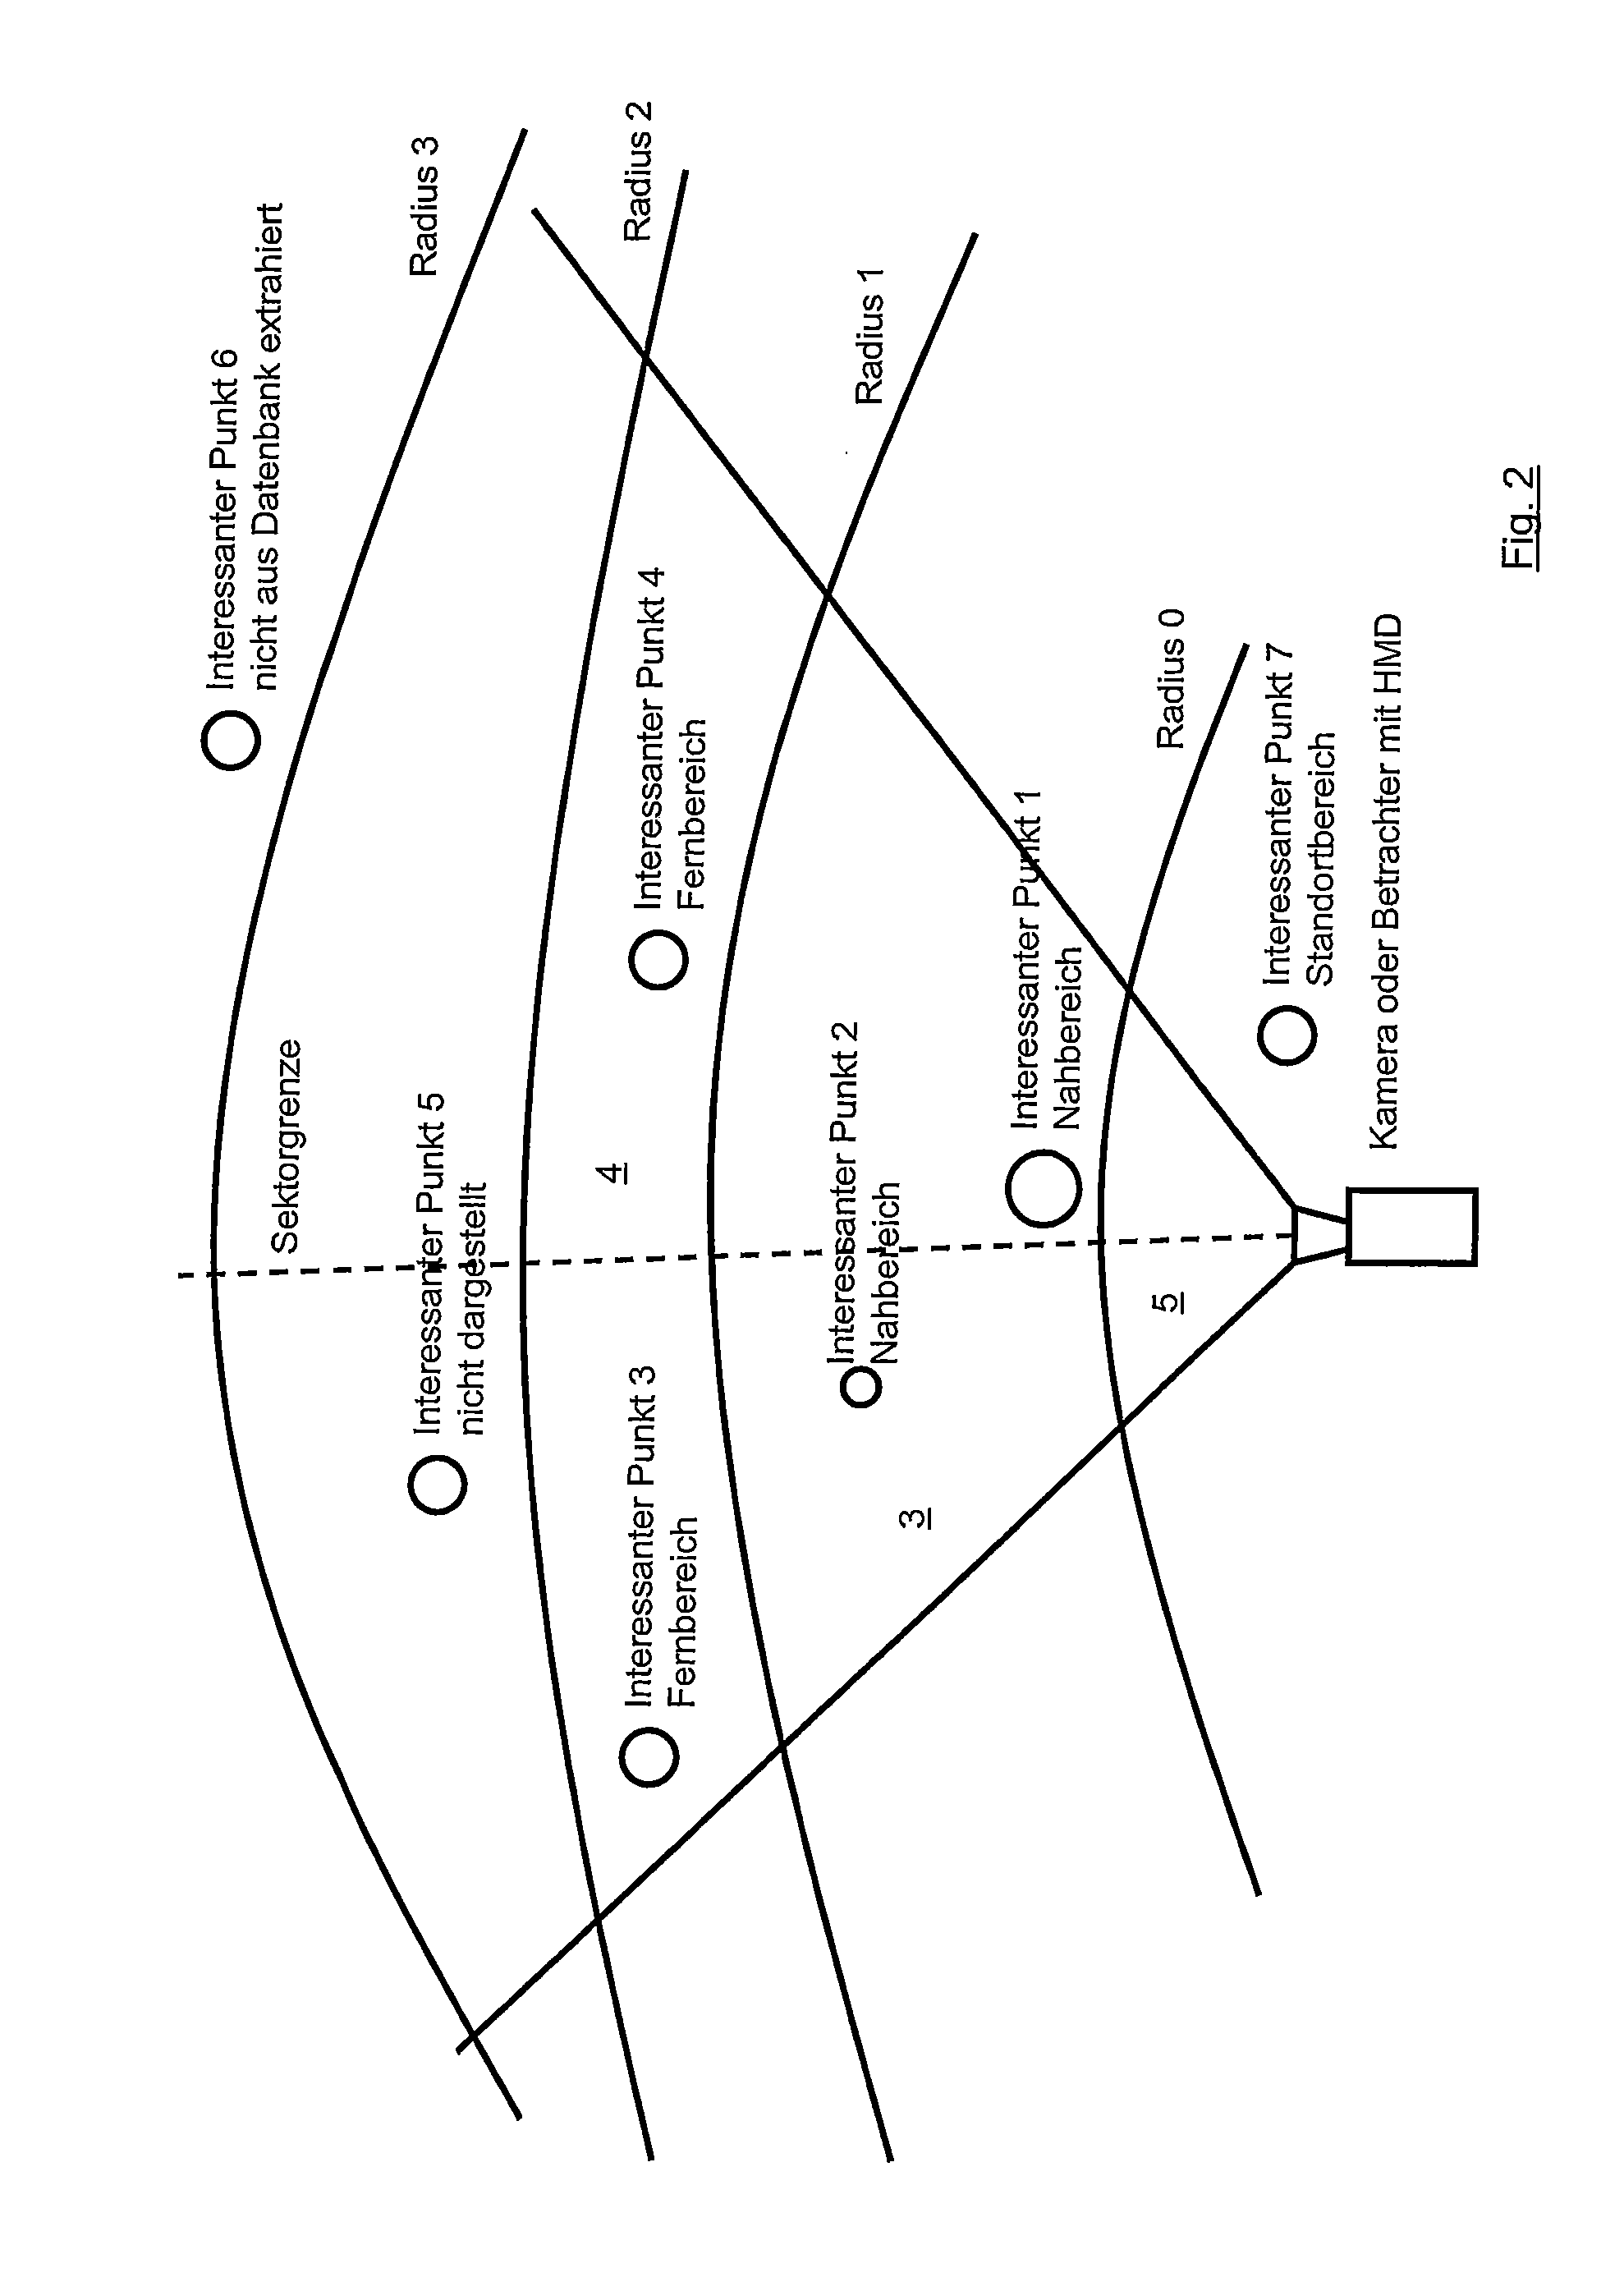 Method for representing virtual information in a real environment